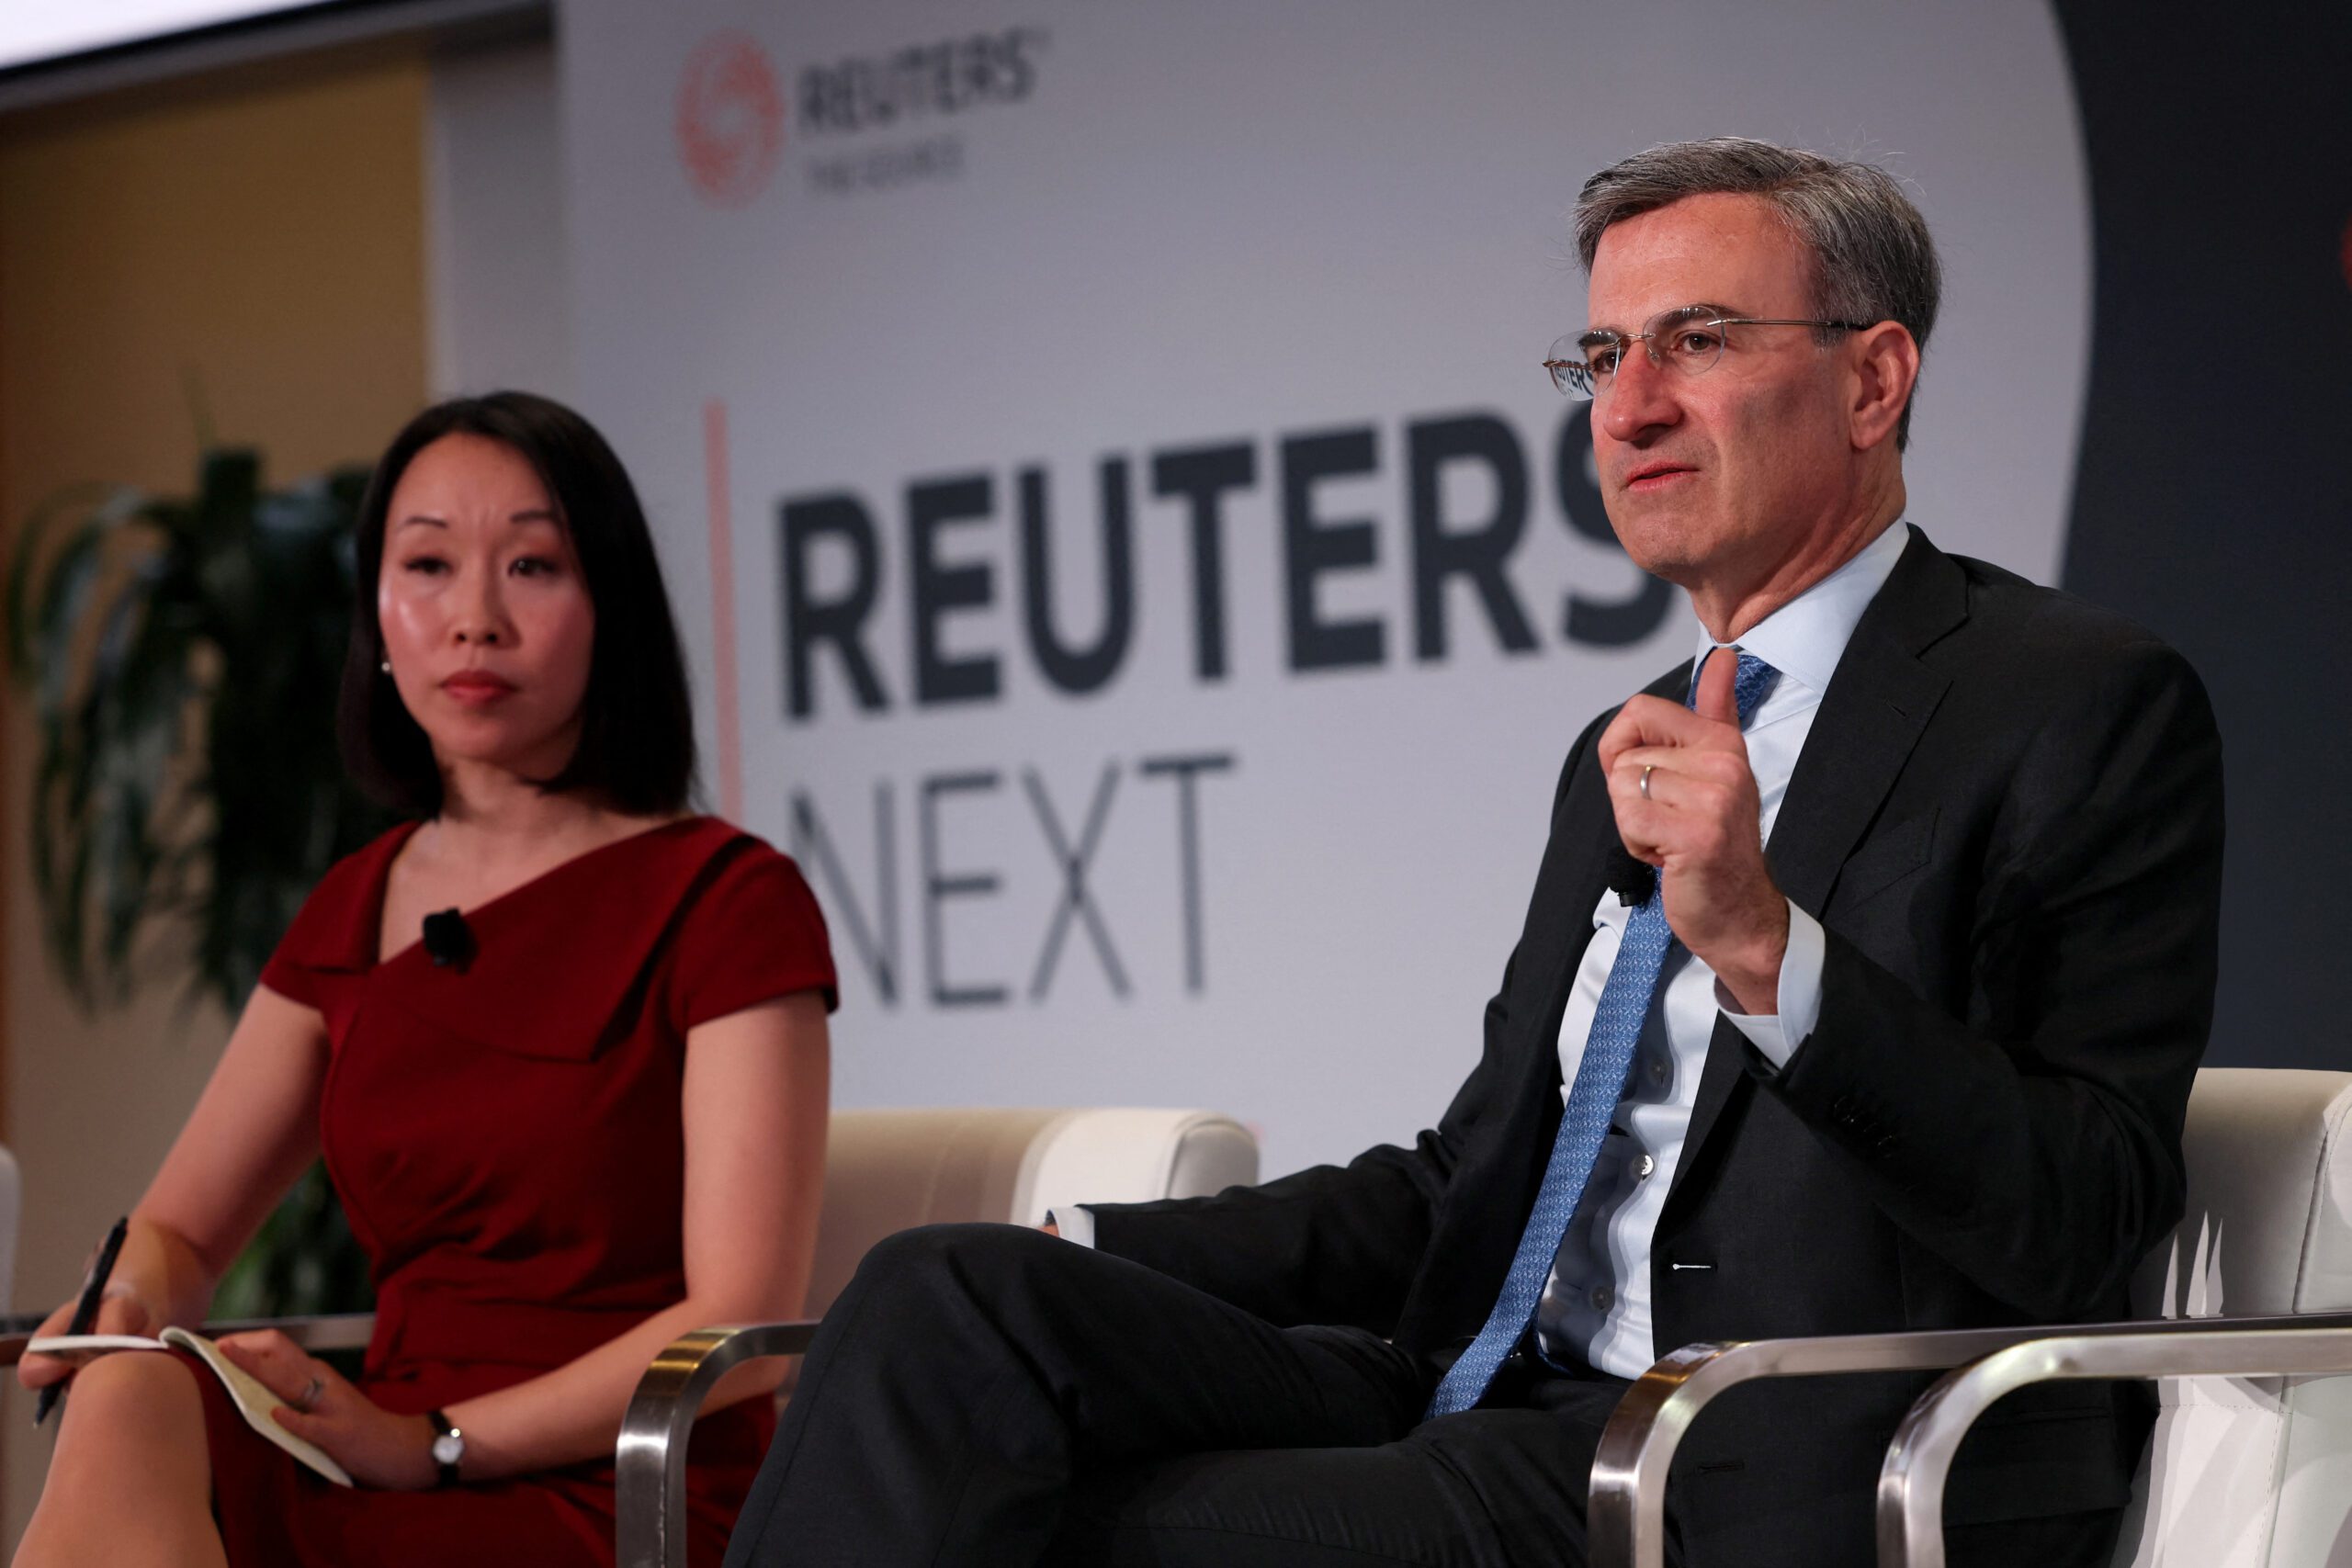 Peter Orszag, CEO of Lazard, speaks at the ReutersNEXT Newsmaker event in New York City, New York, U.S., November 9, 2023. REUTERS/Brendan McDermid